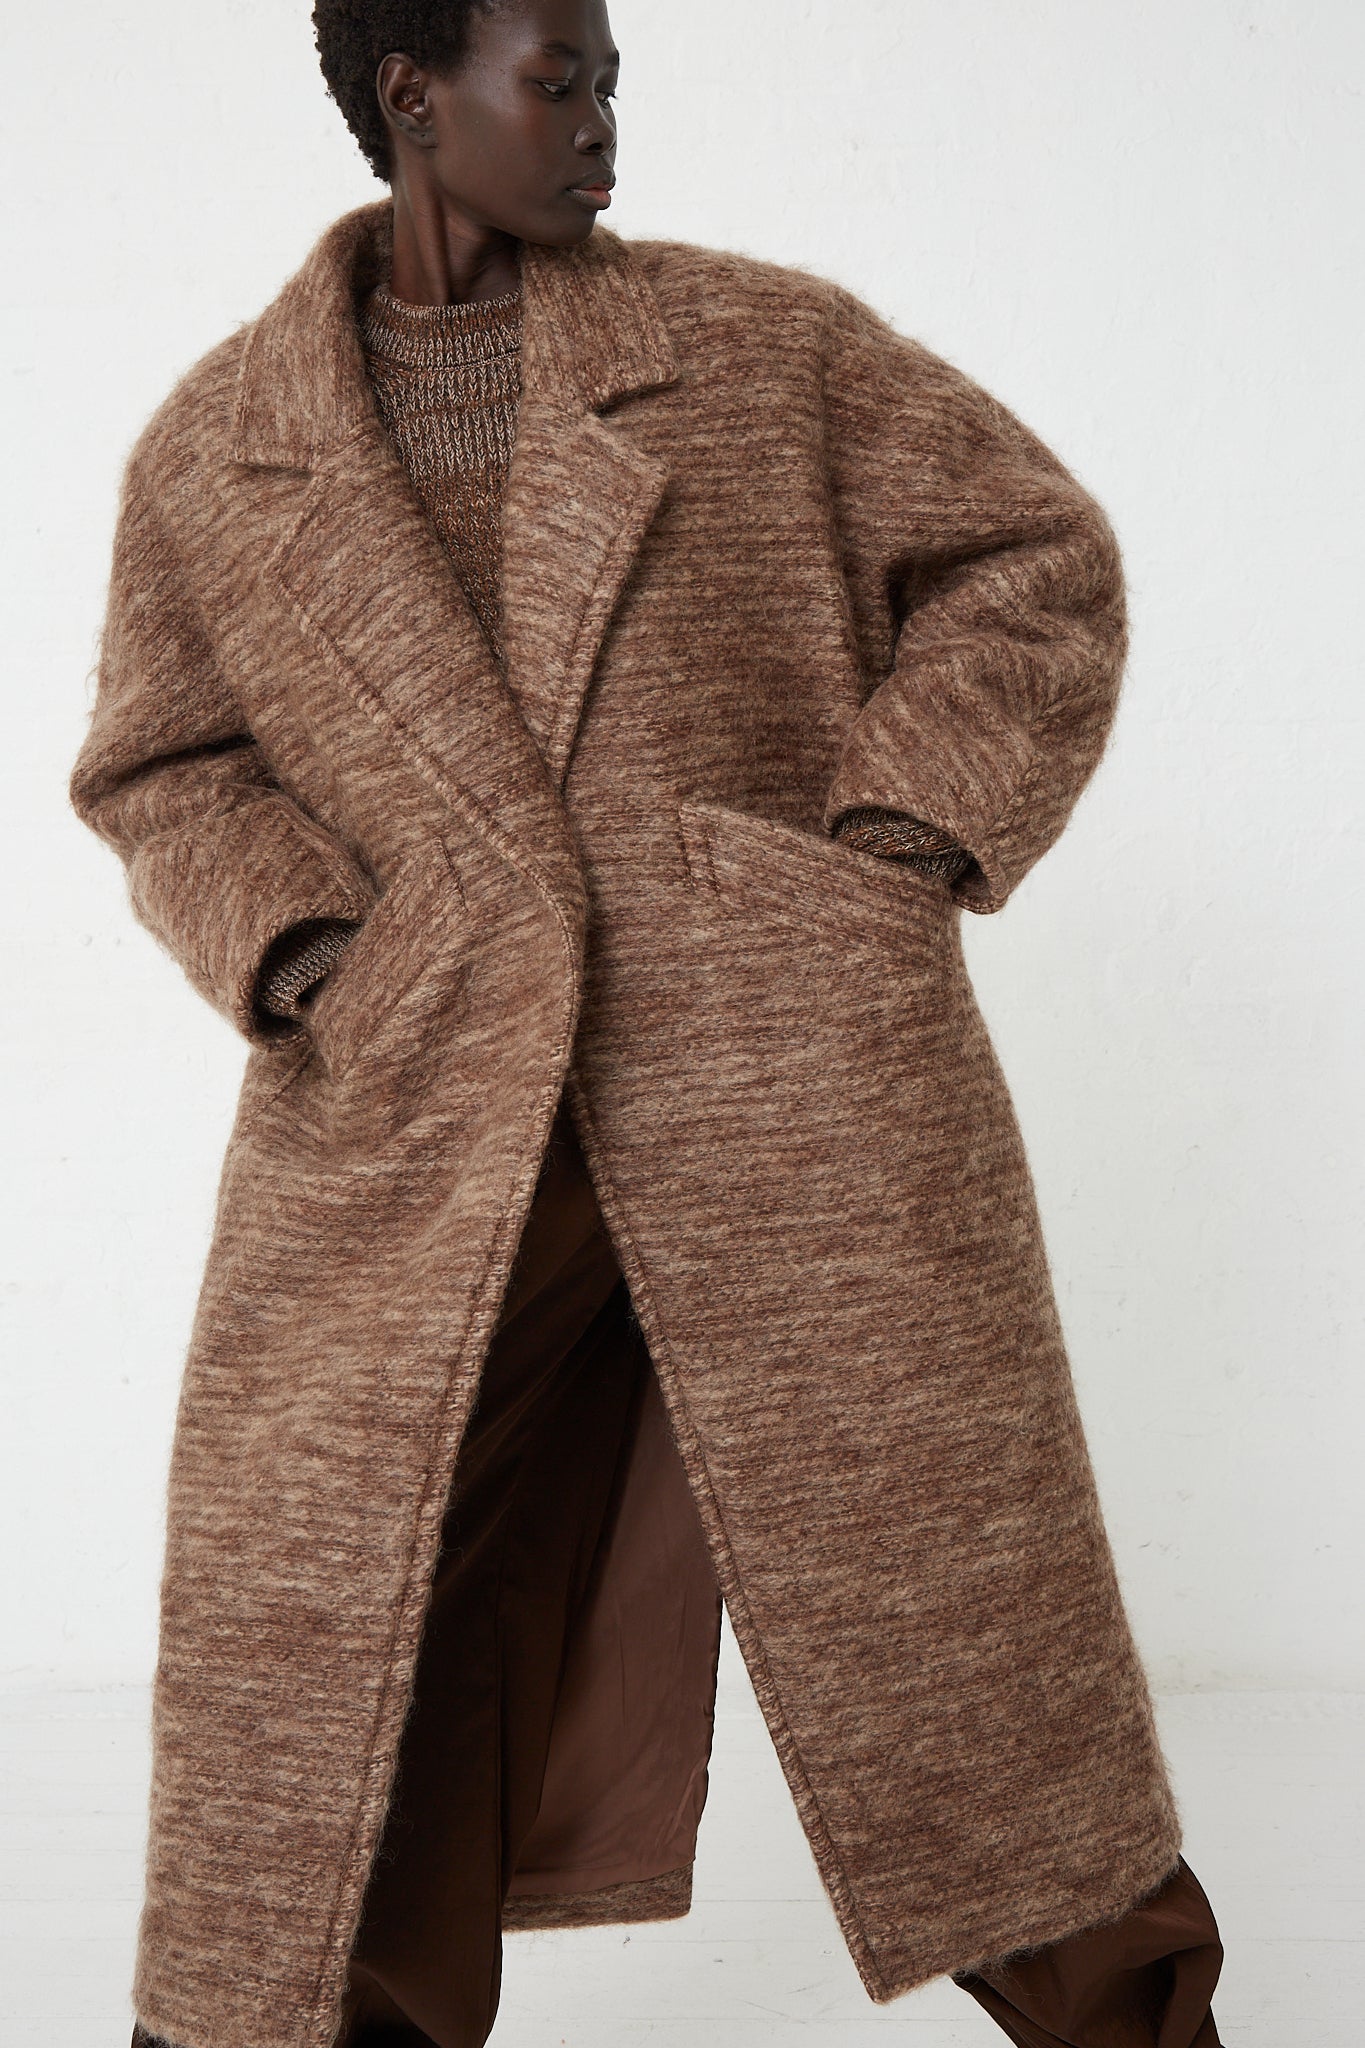 Veronique Leroy's exclusive Wide Shoulder Tailor Coat in Oak. Available at Oroboro store.